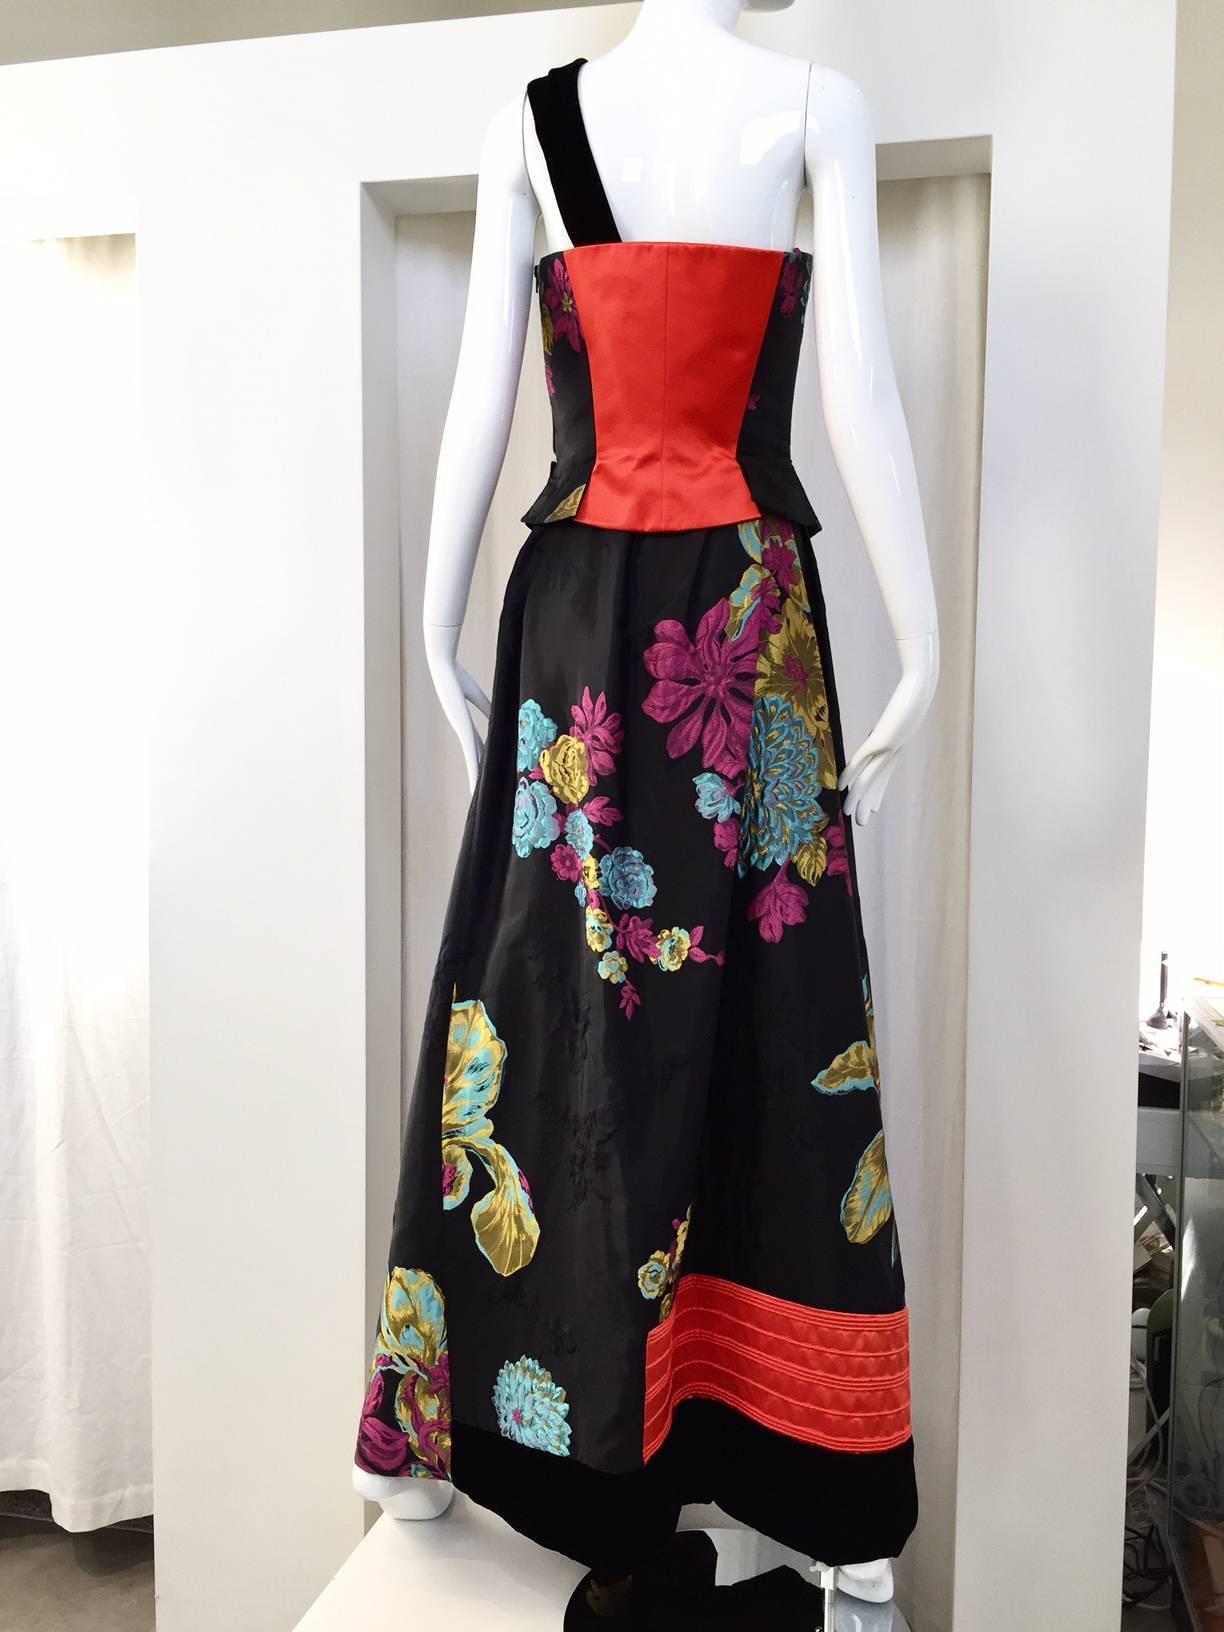 This Vintage Christian Lacroix  bustier and skirt set is an exquisite combination of color and textures.  The vibrant colors in the floral print are highlighted against the black silk fabric and offset further by subtle 